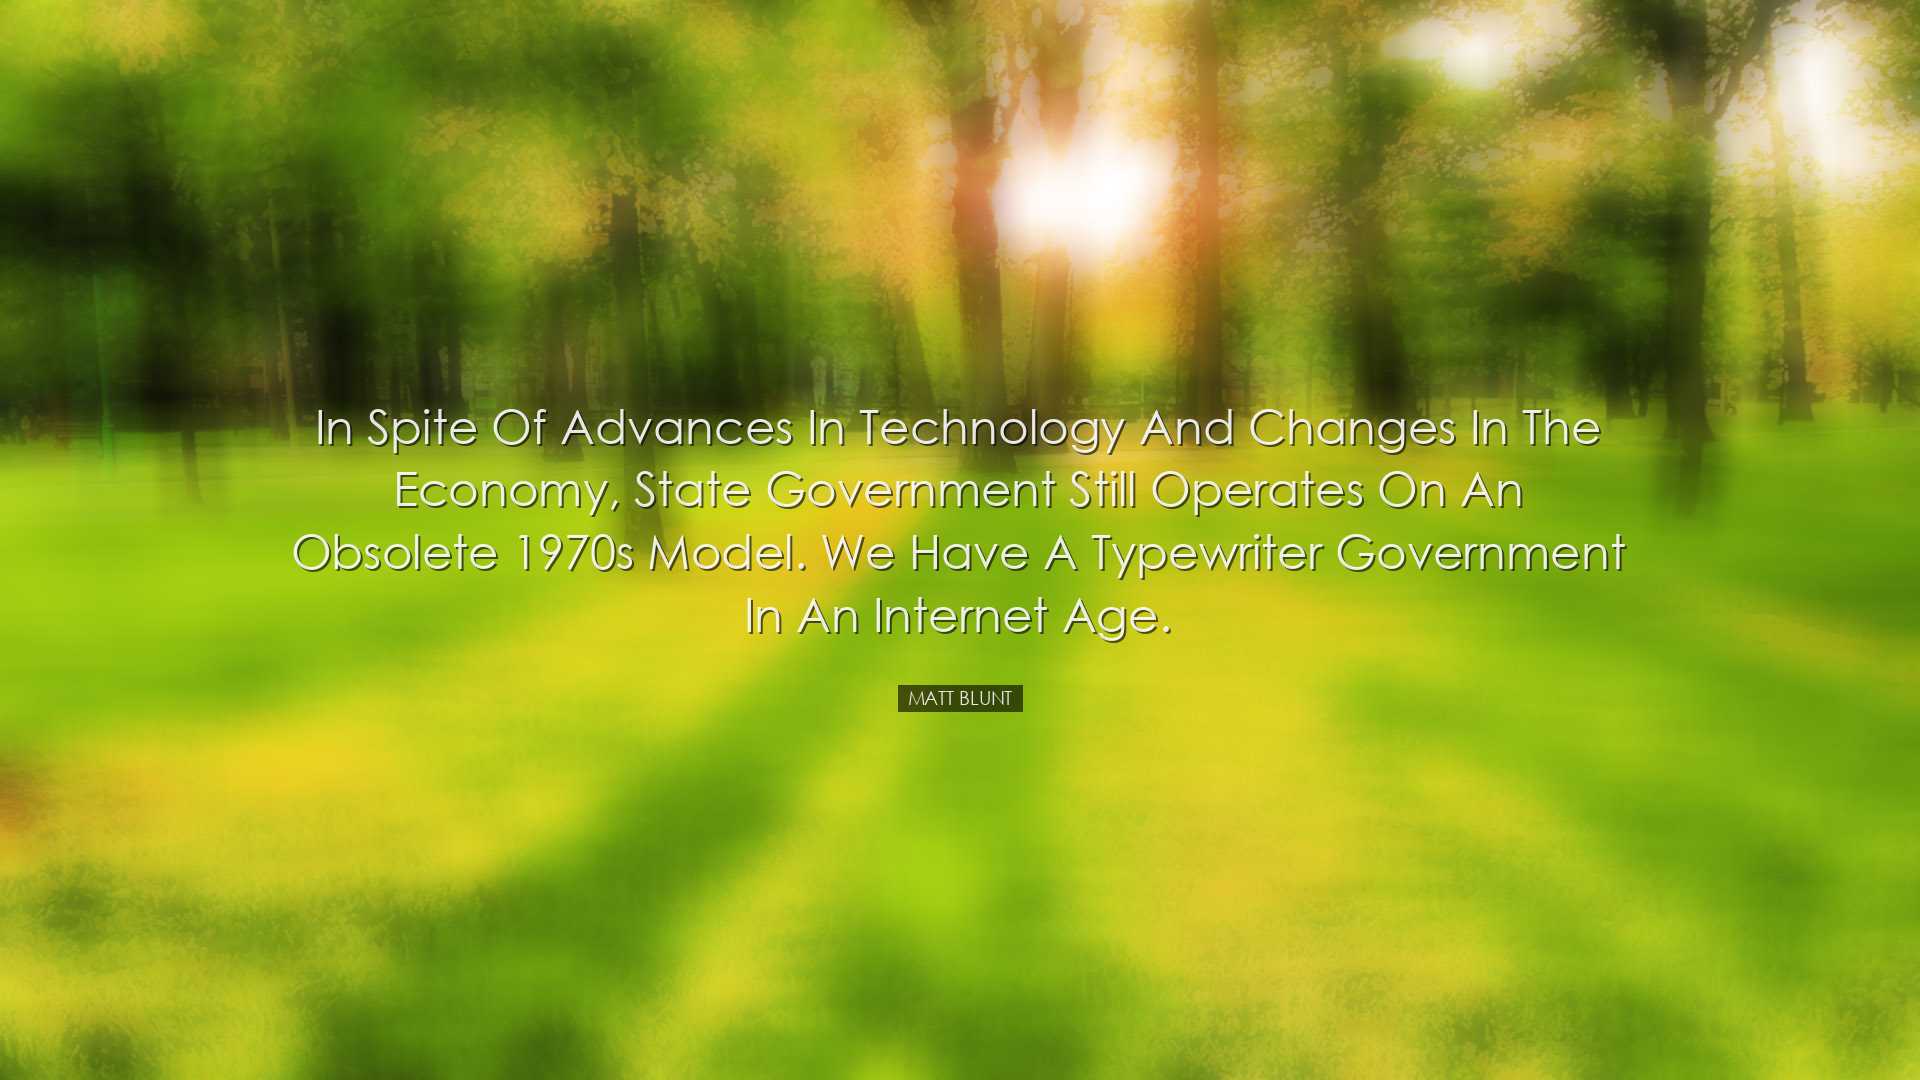 In spite of advances in technology and changes in the economy, sta